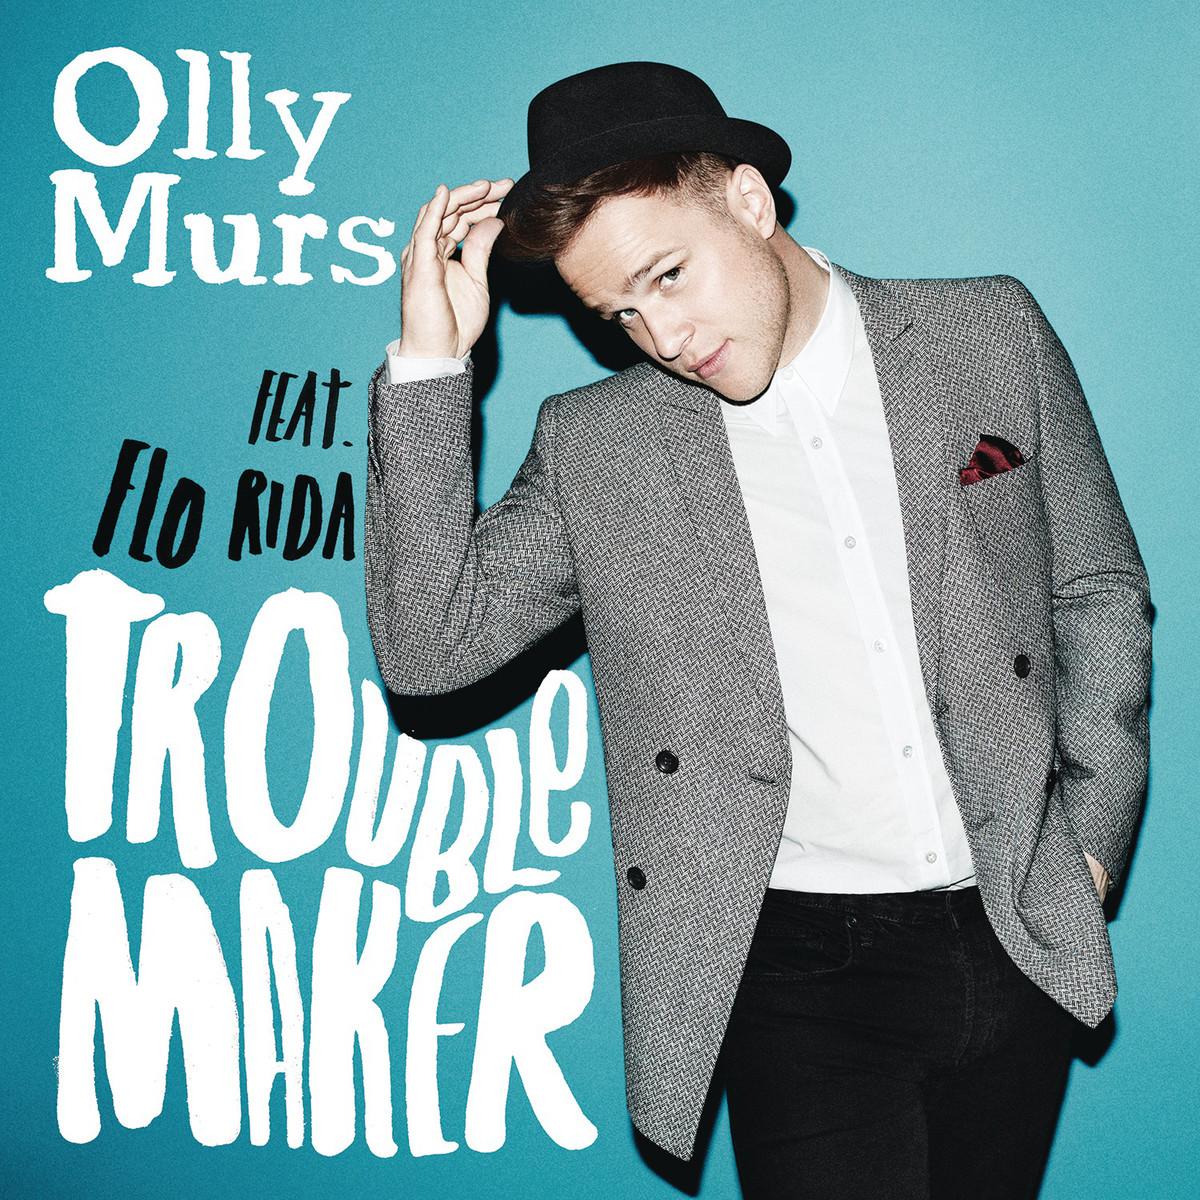 olly-murs-feat-flo-rida-troublemaker